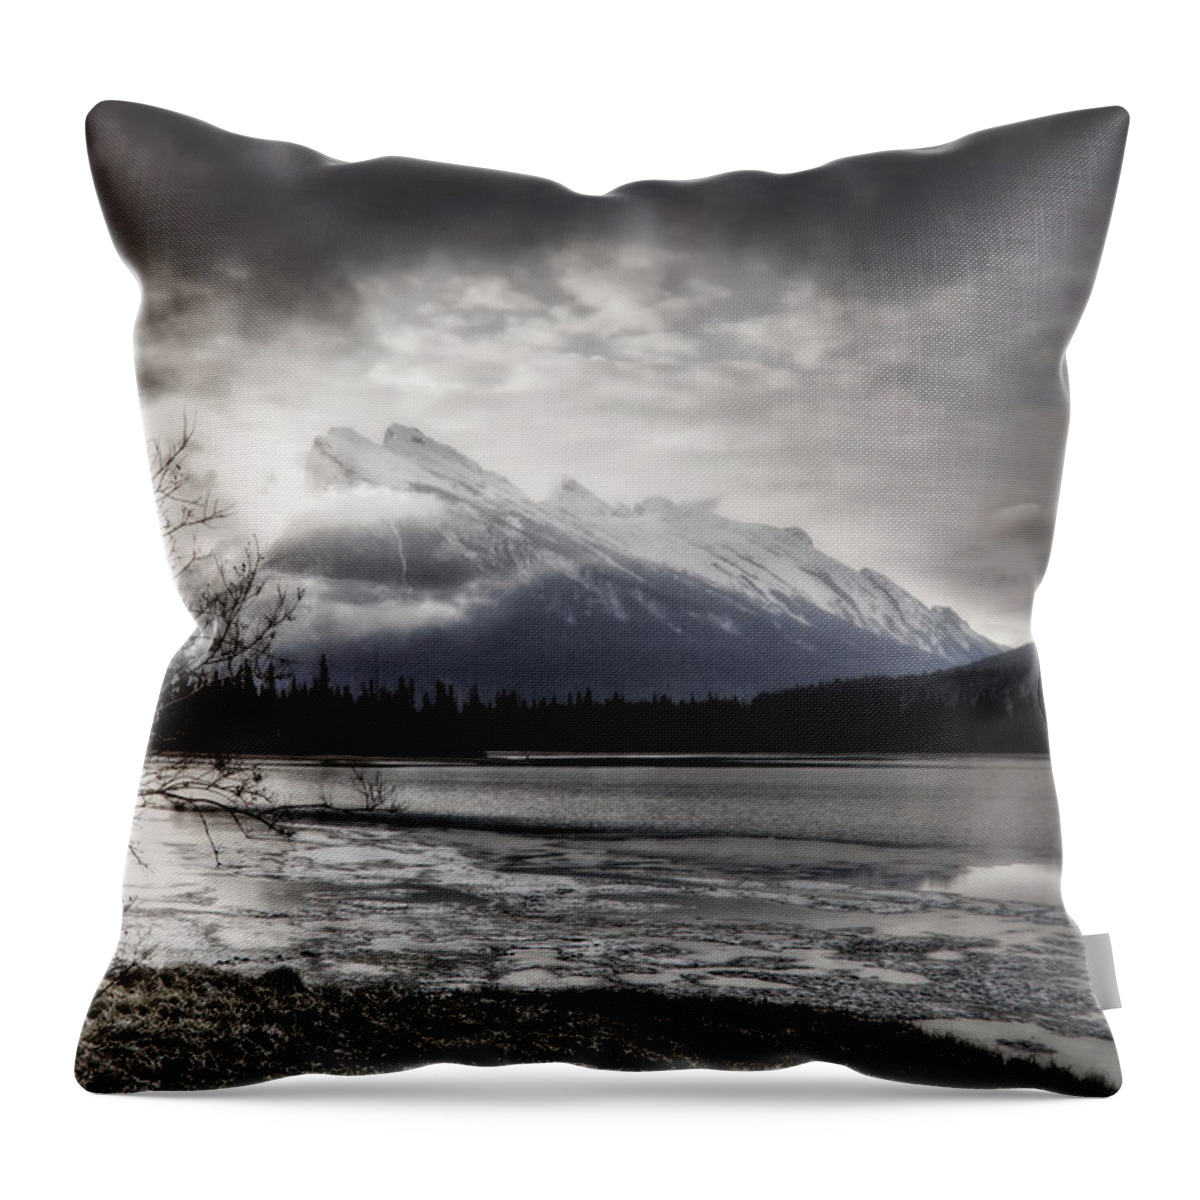 Mount Rundle Throw Pillow featuring the digital art Mount Rundle Banff by Diane Dugas